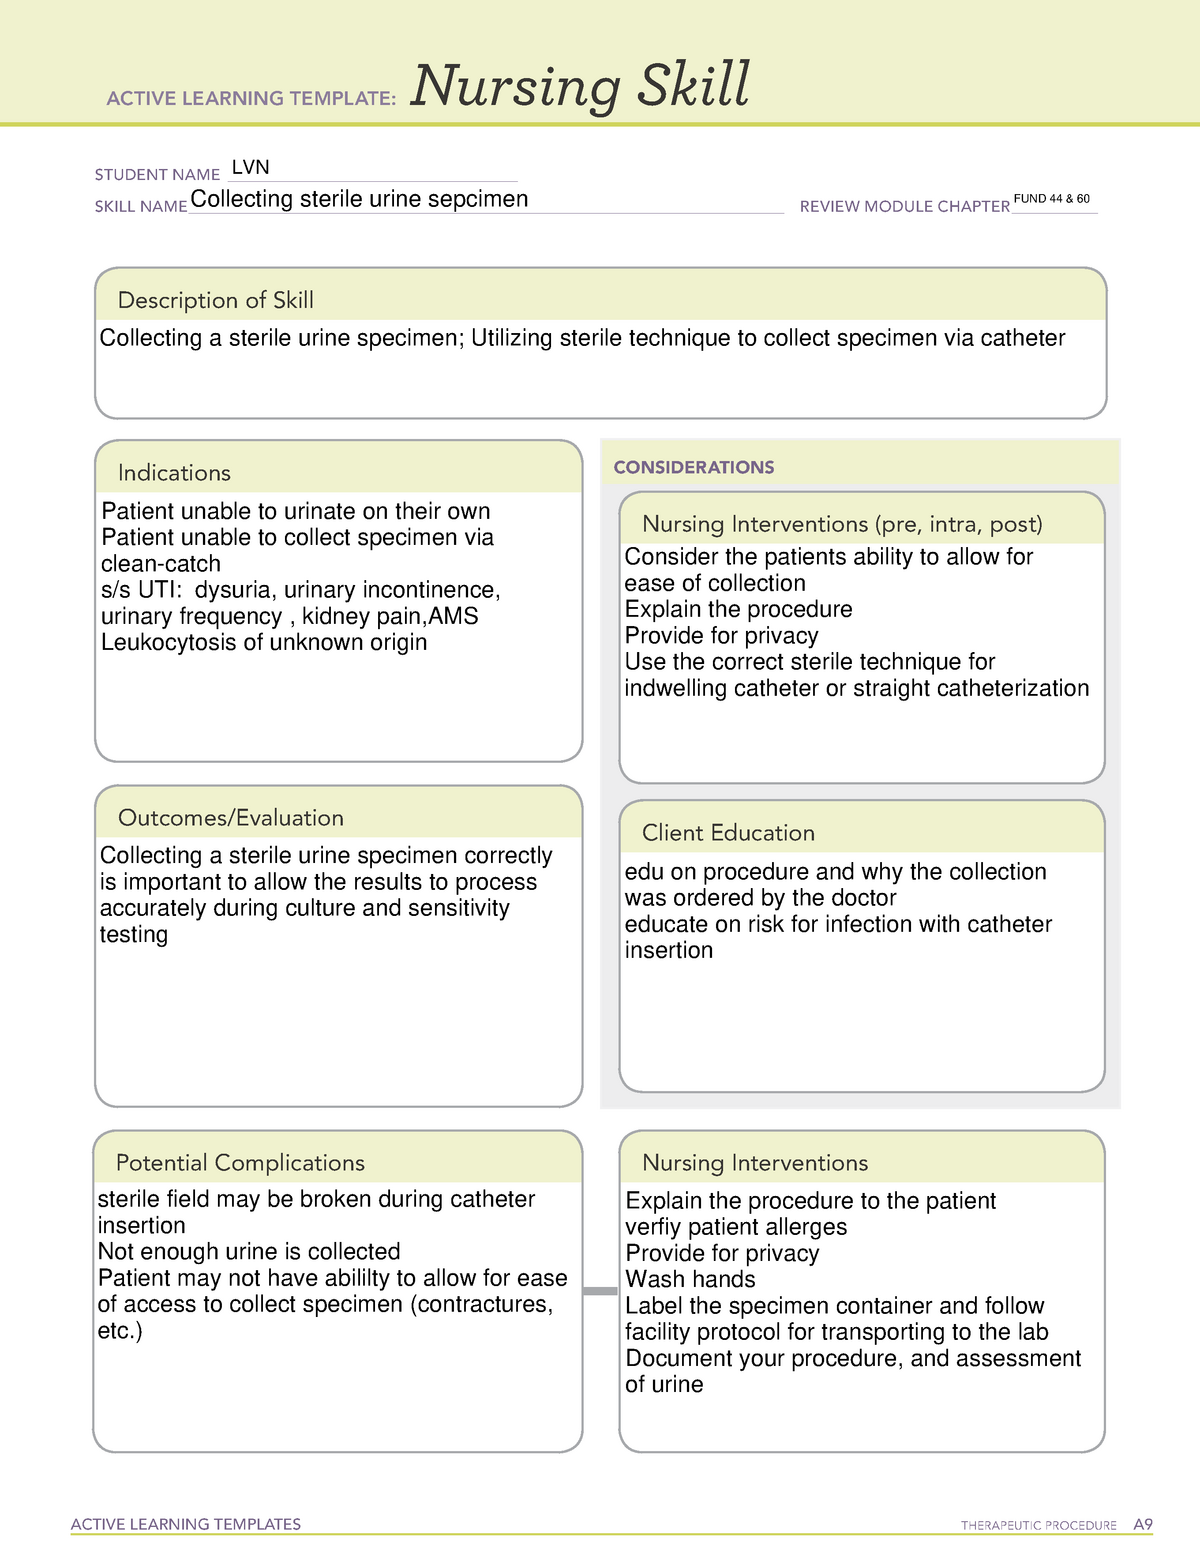 Collecting sterile urine specimen template ACTIVE LEARNING TEMPLATES